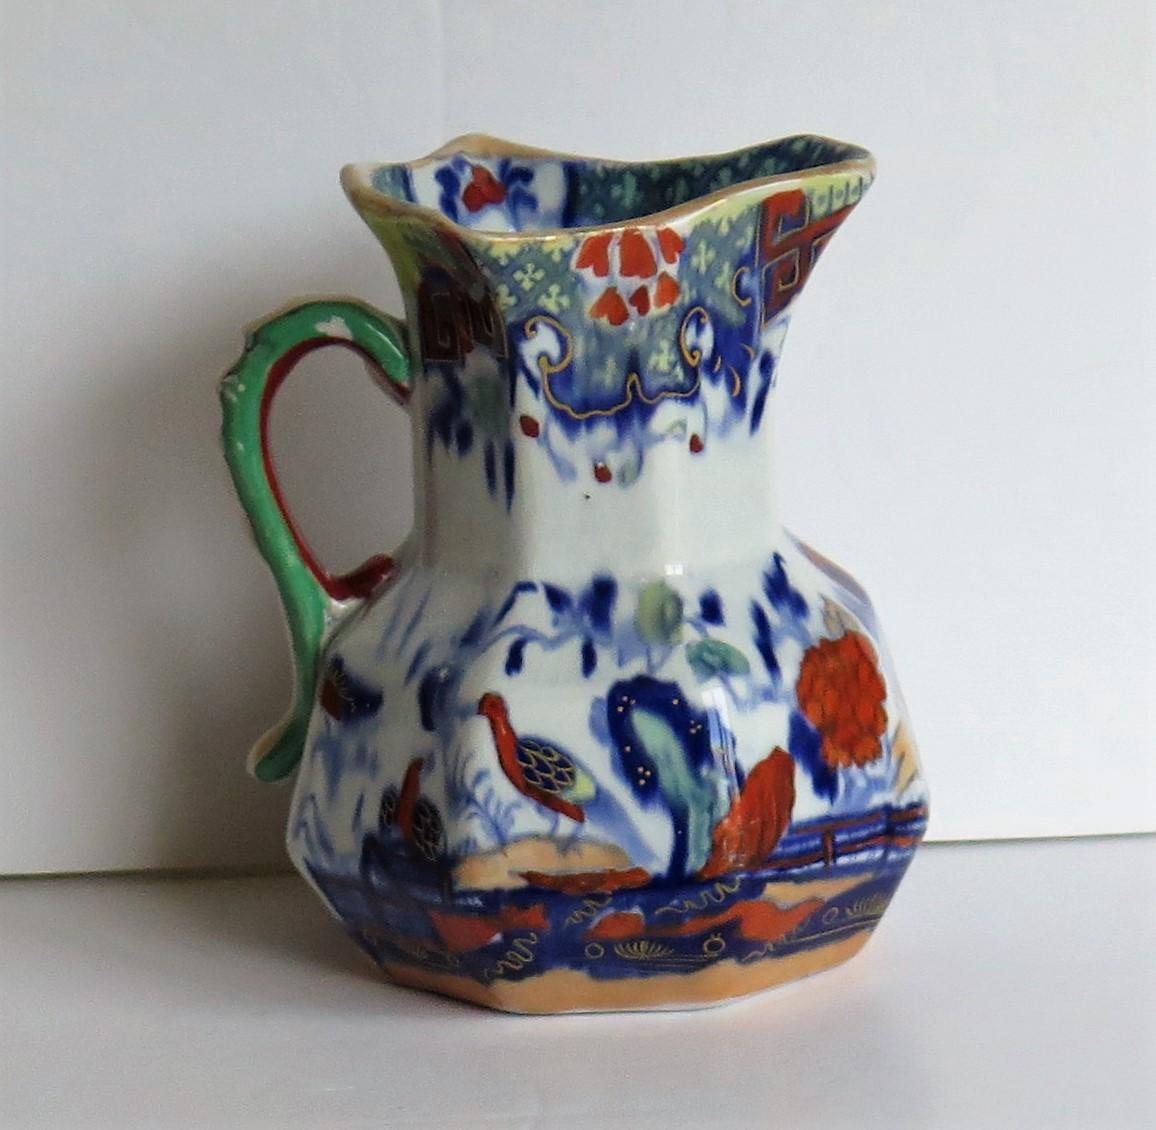 This is a very good Hydra jug or pitcher, made by Mason's Ironstone, England in the RARE Heron pattern and fully marked to the base, dating it to circa 1830

The jug is octagonal in shape with the snake handle. These jugs were made in a range of